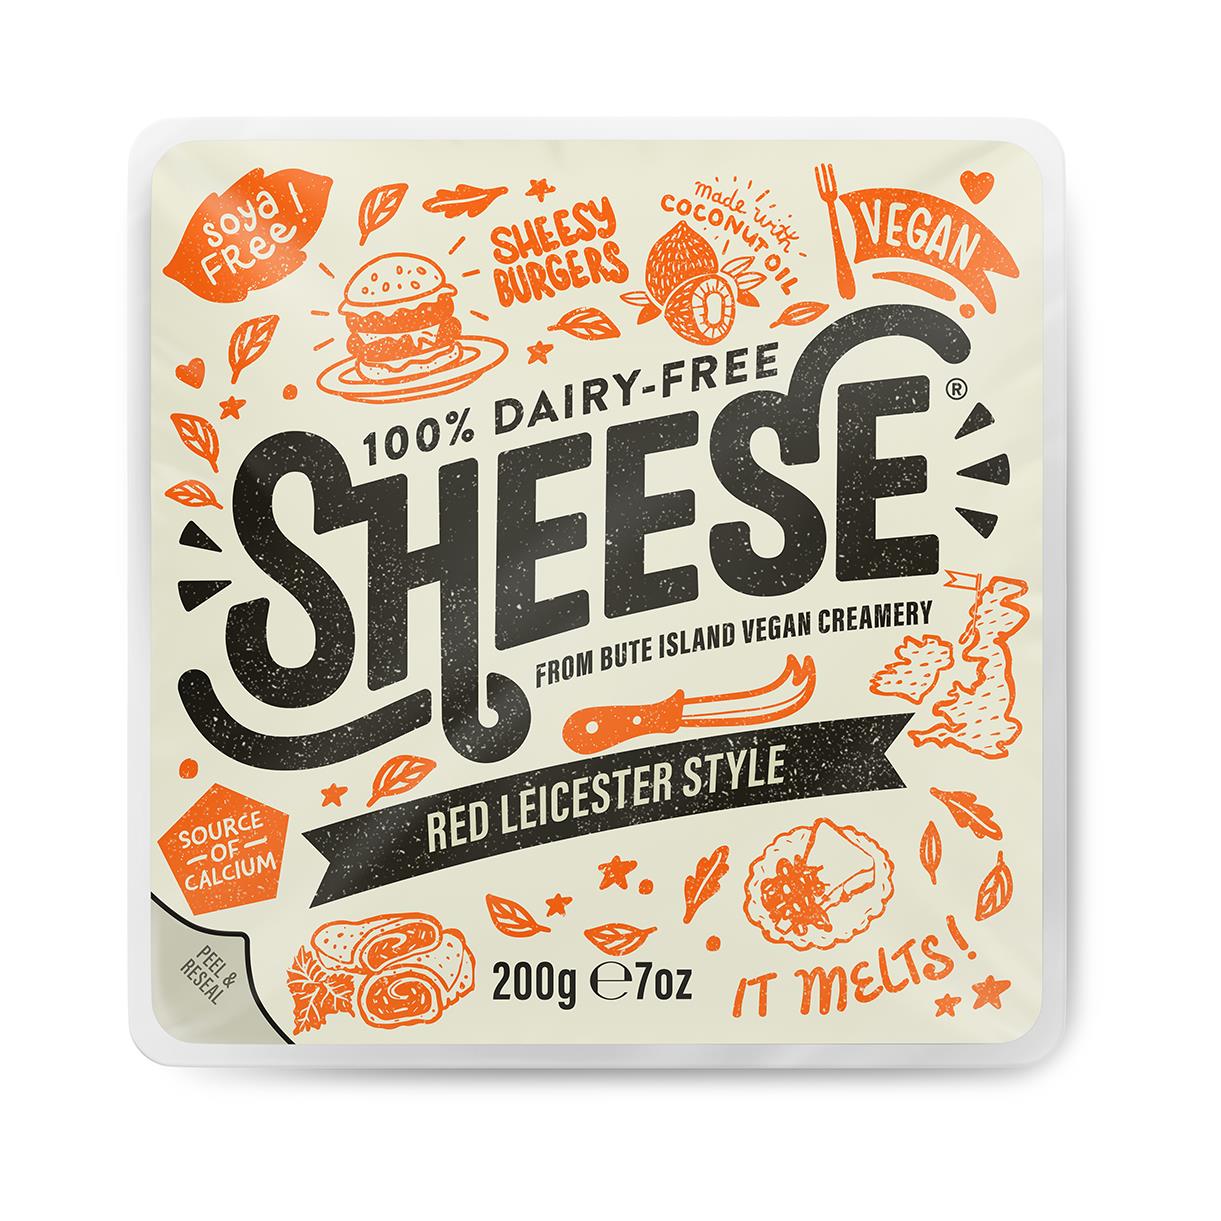 Sheese - Red Leicester Style block - 200g - GF